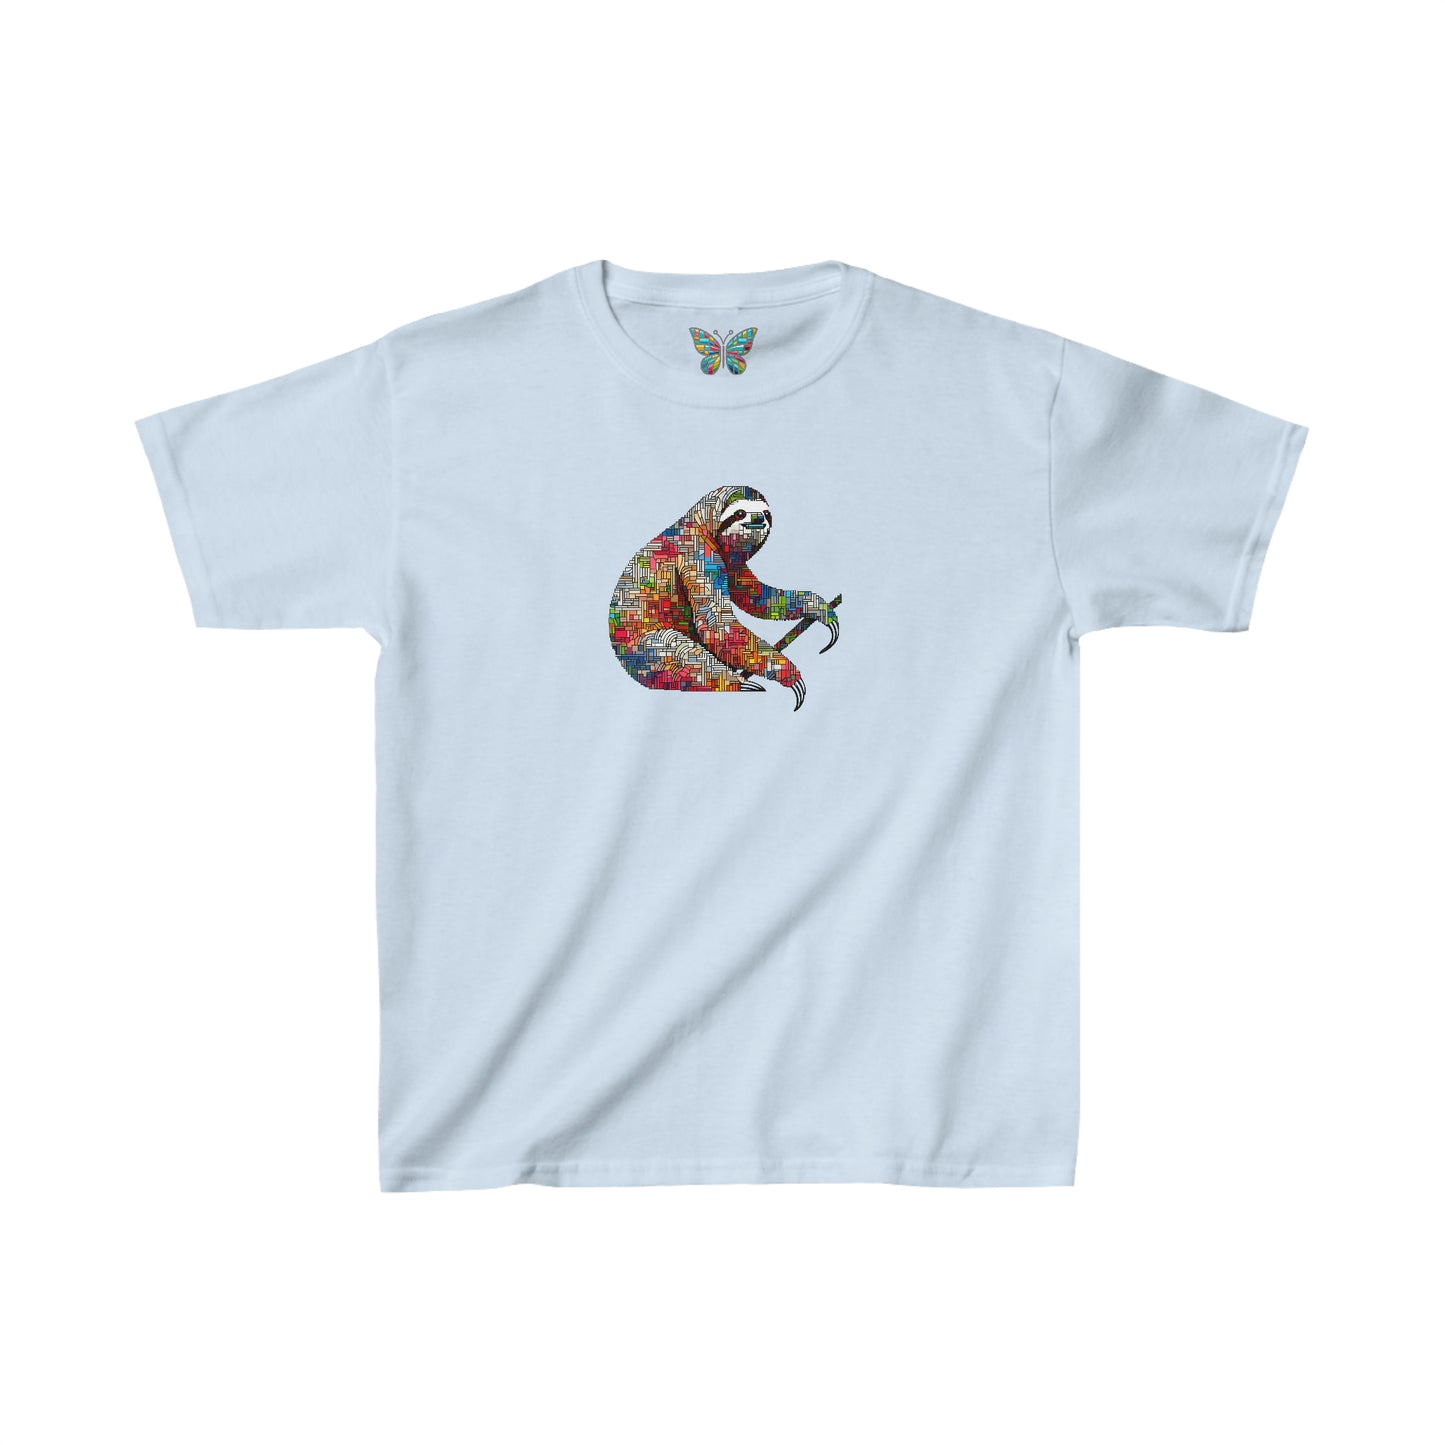 Sloth Vibroscape - Youth - Snazzle Tee